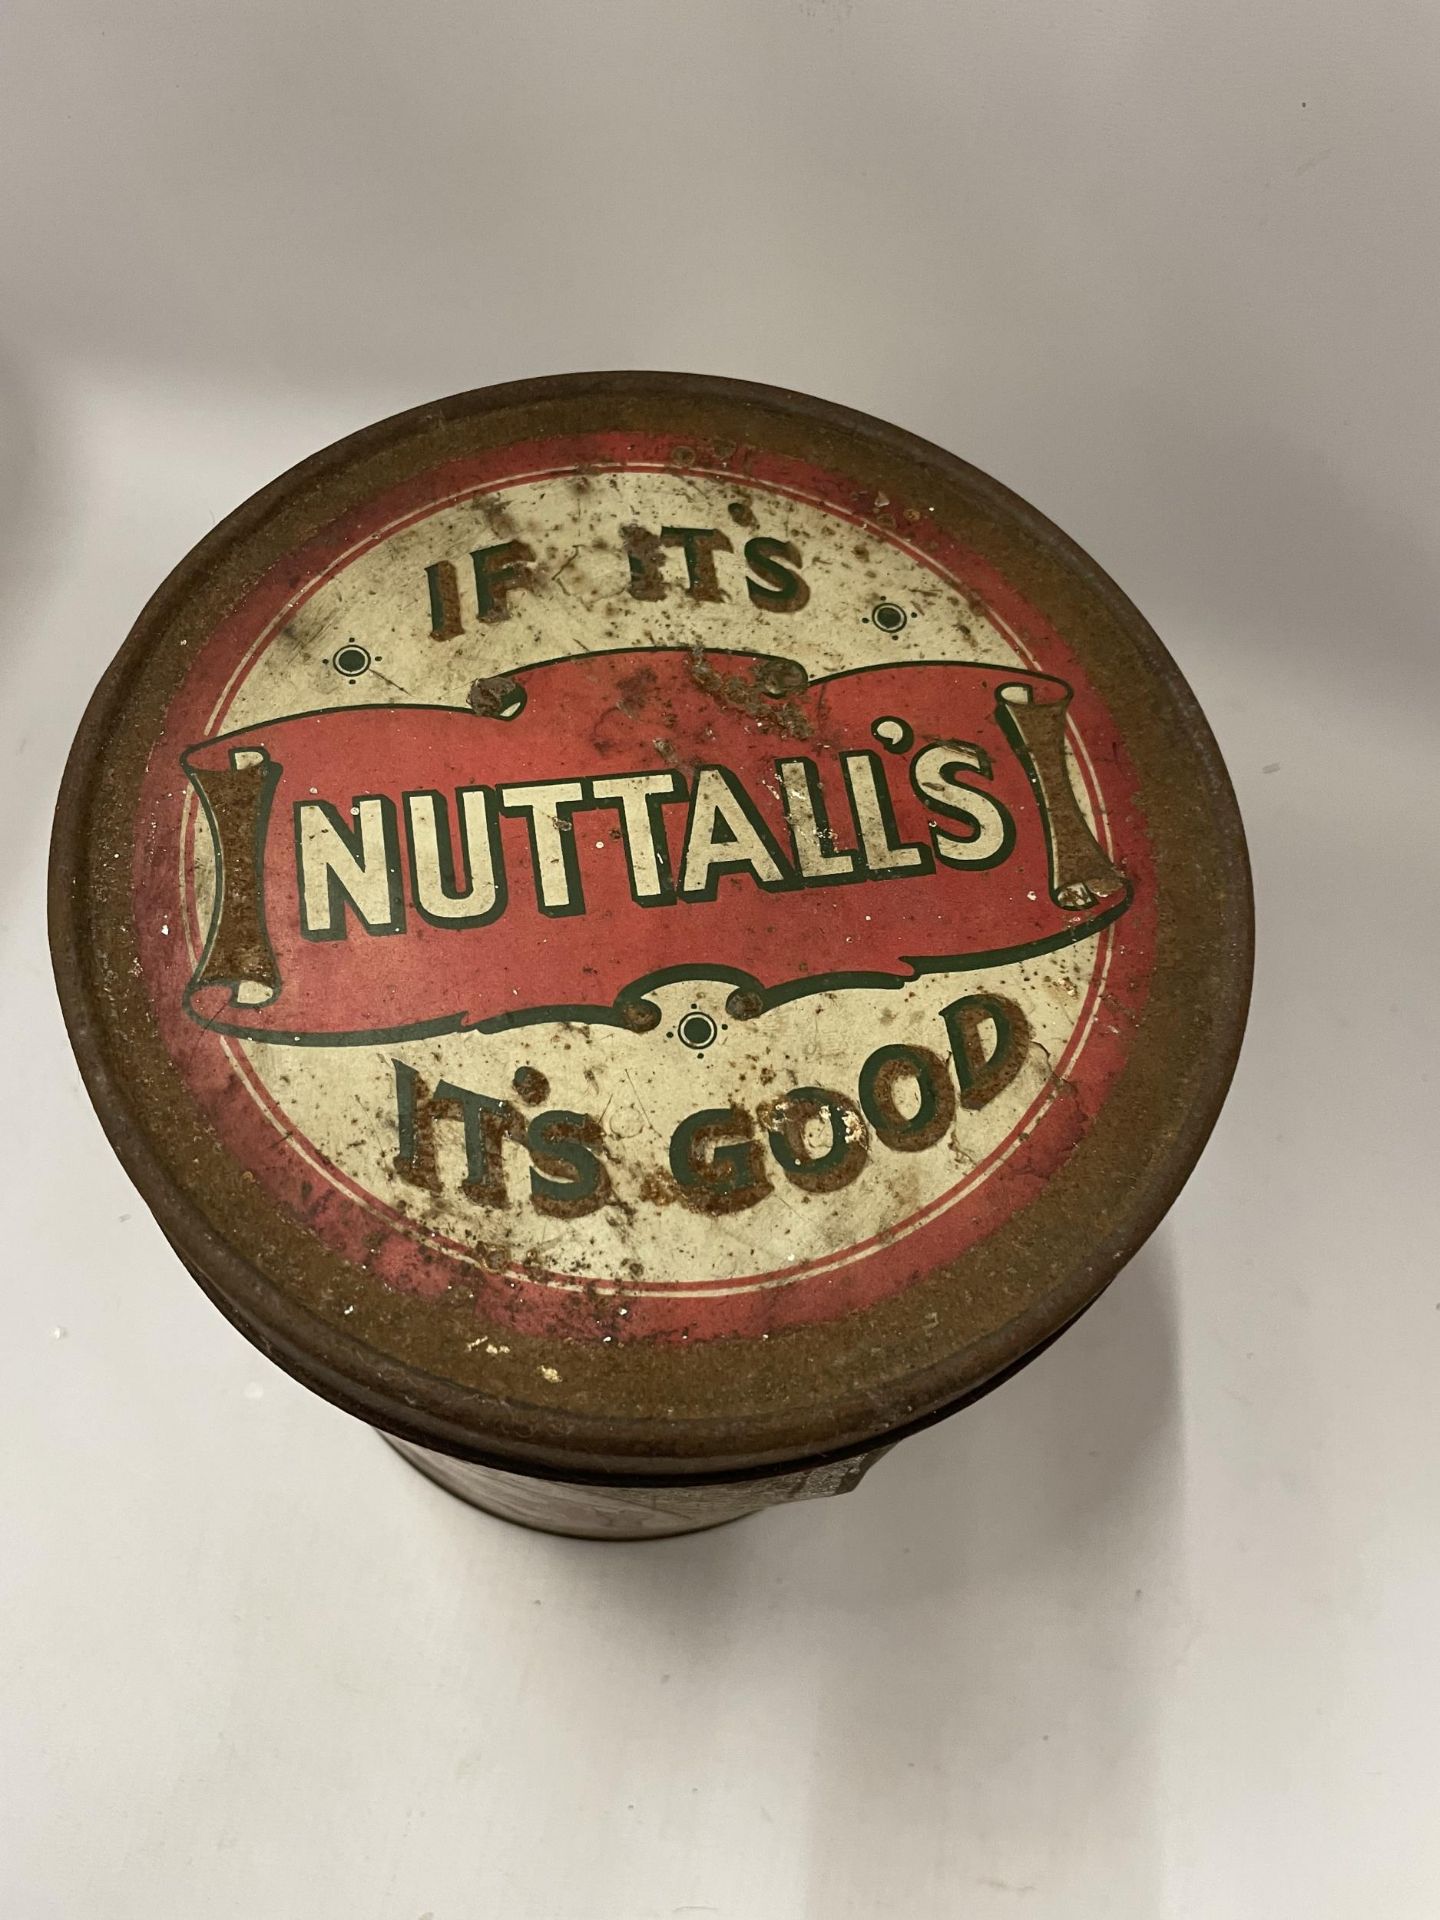 A VINTAGE 'NUTTALL'S' MINTOES TIN - Image 2 of 2